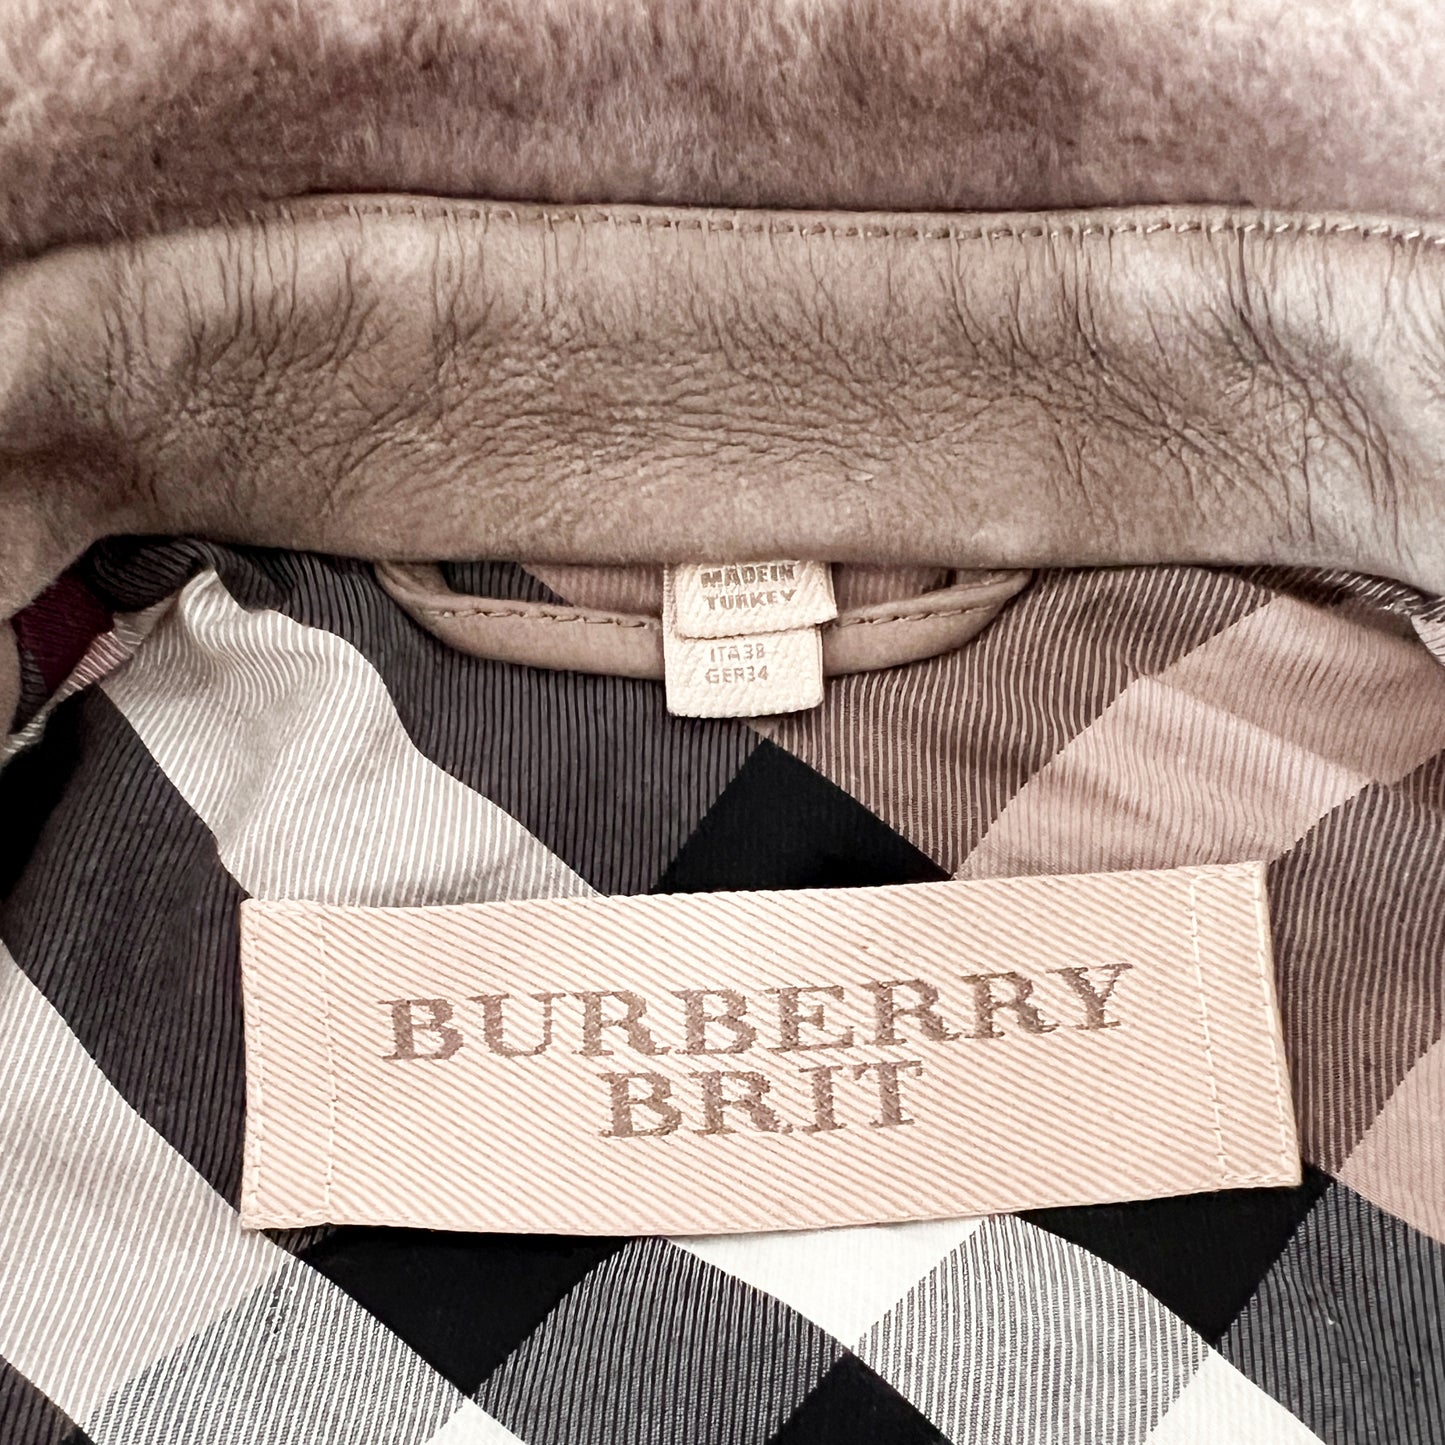 Burberry Brit Jacket 100% Lamb Suede Shearling Double Breasted Coat Jacket Size US 6